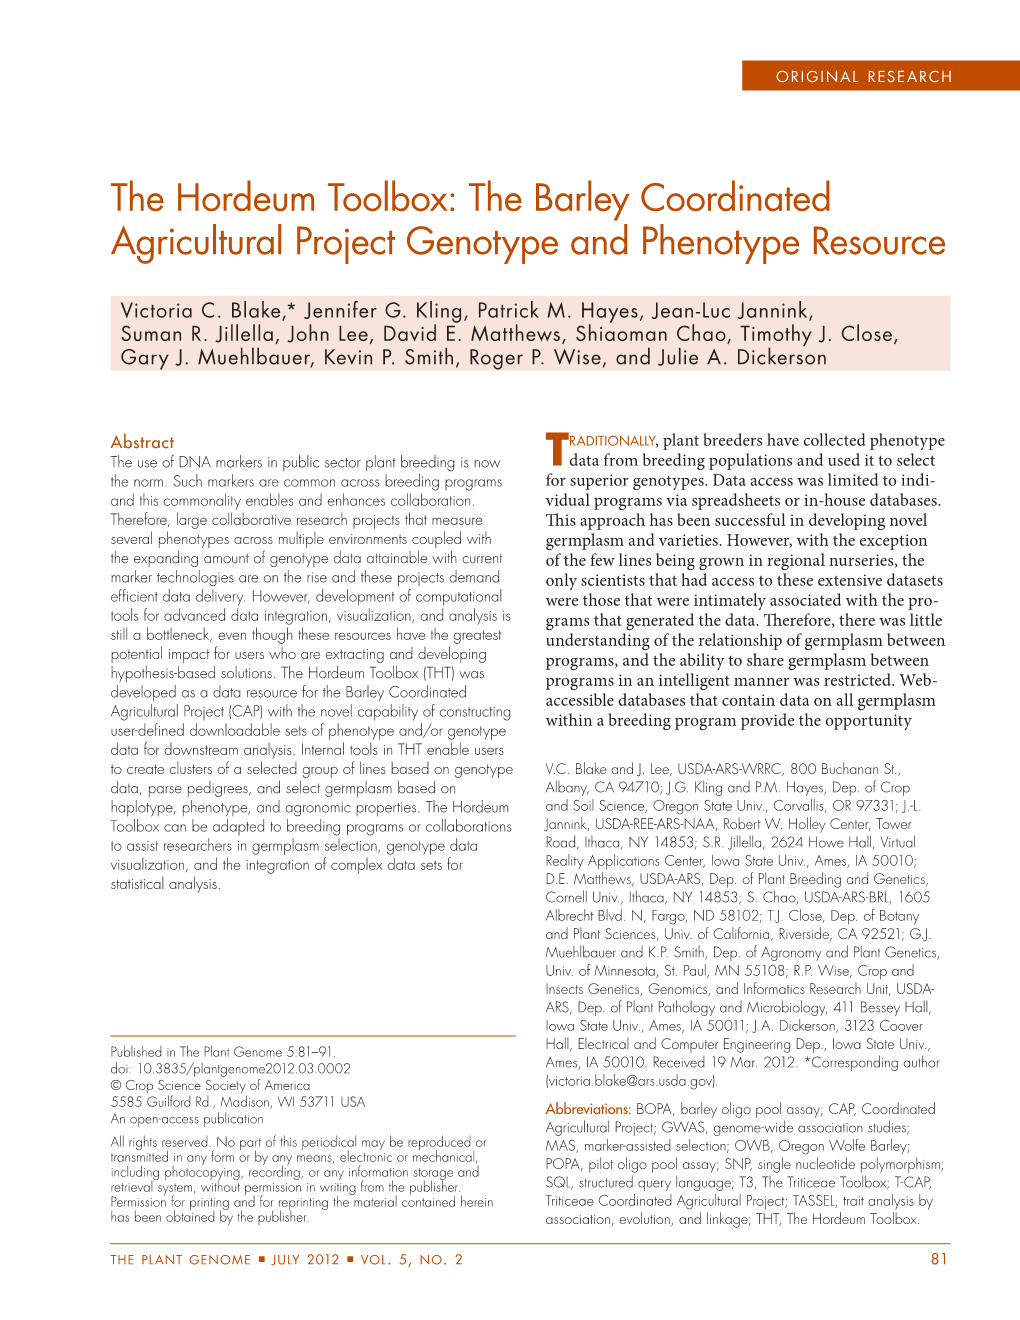 The Hordeum Toolbox: the Barley Coordinated Agricultural Project Genotype and Phenotype Resource